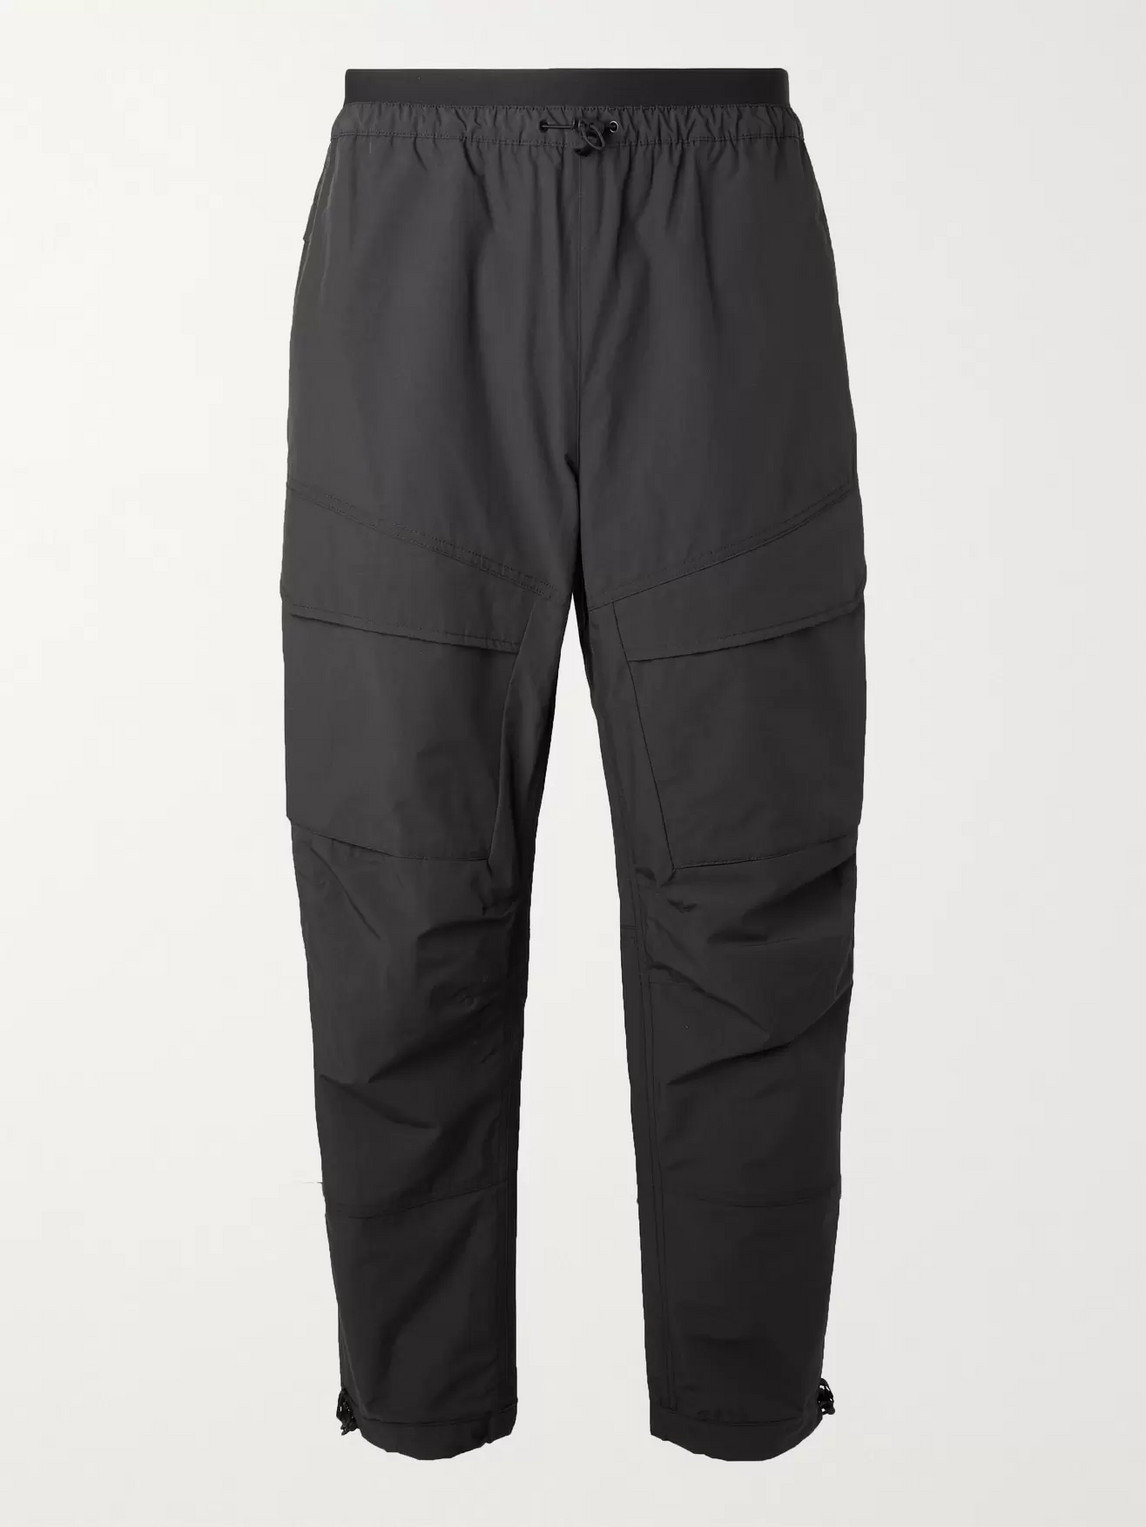 NIKE TECH PACK TAPERED SHELL SWEATPANTS